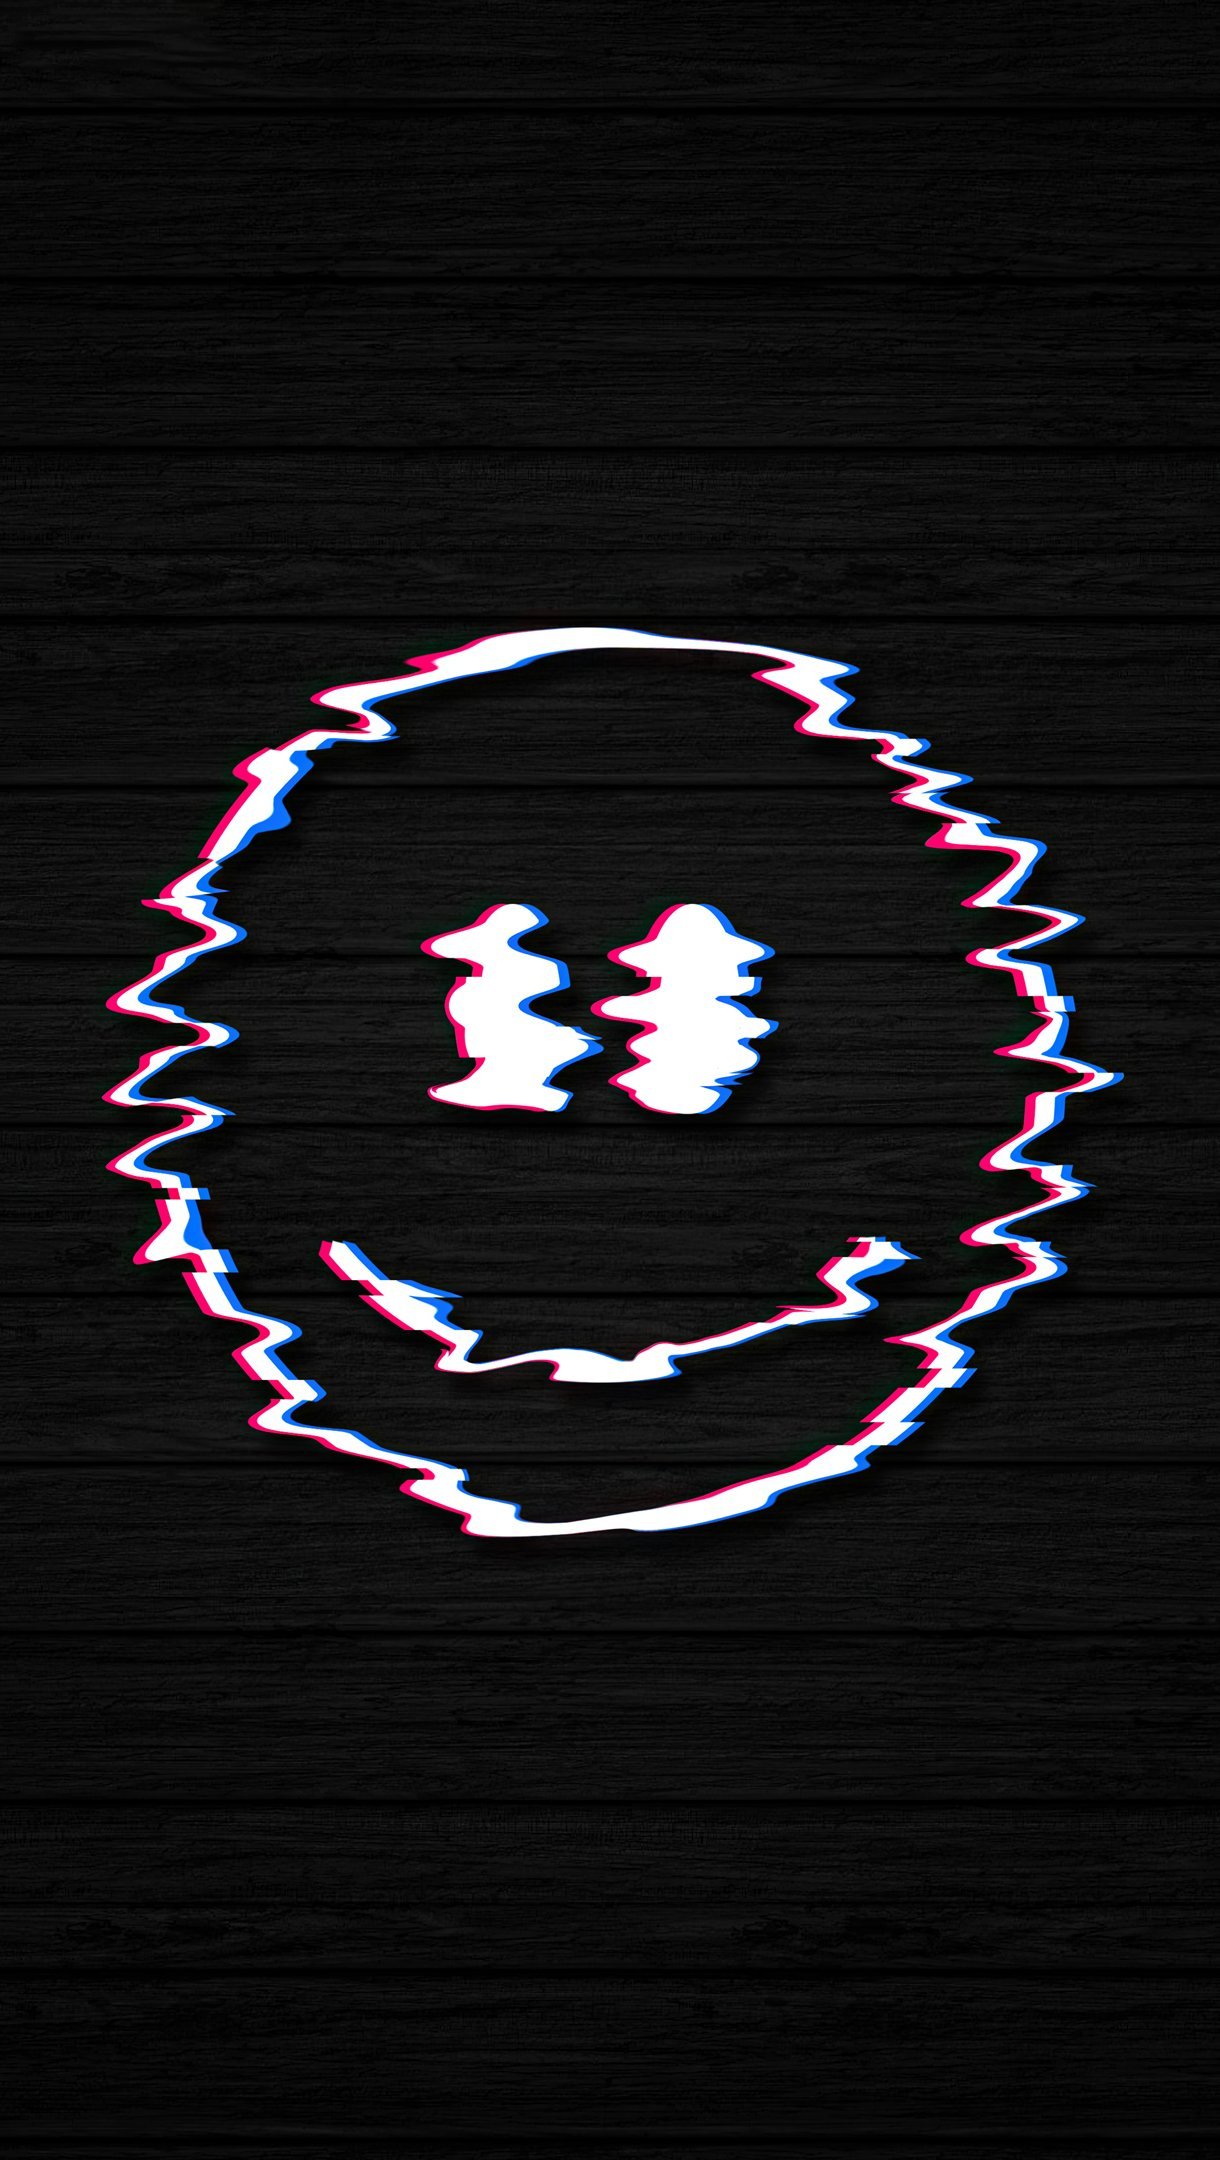 Wallpaper Smiley face with glitch Vertical